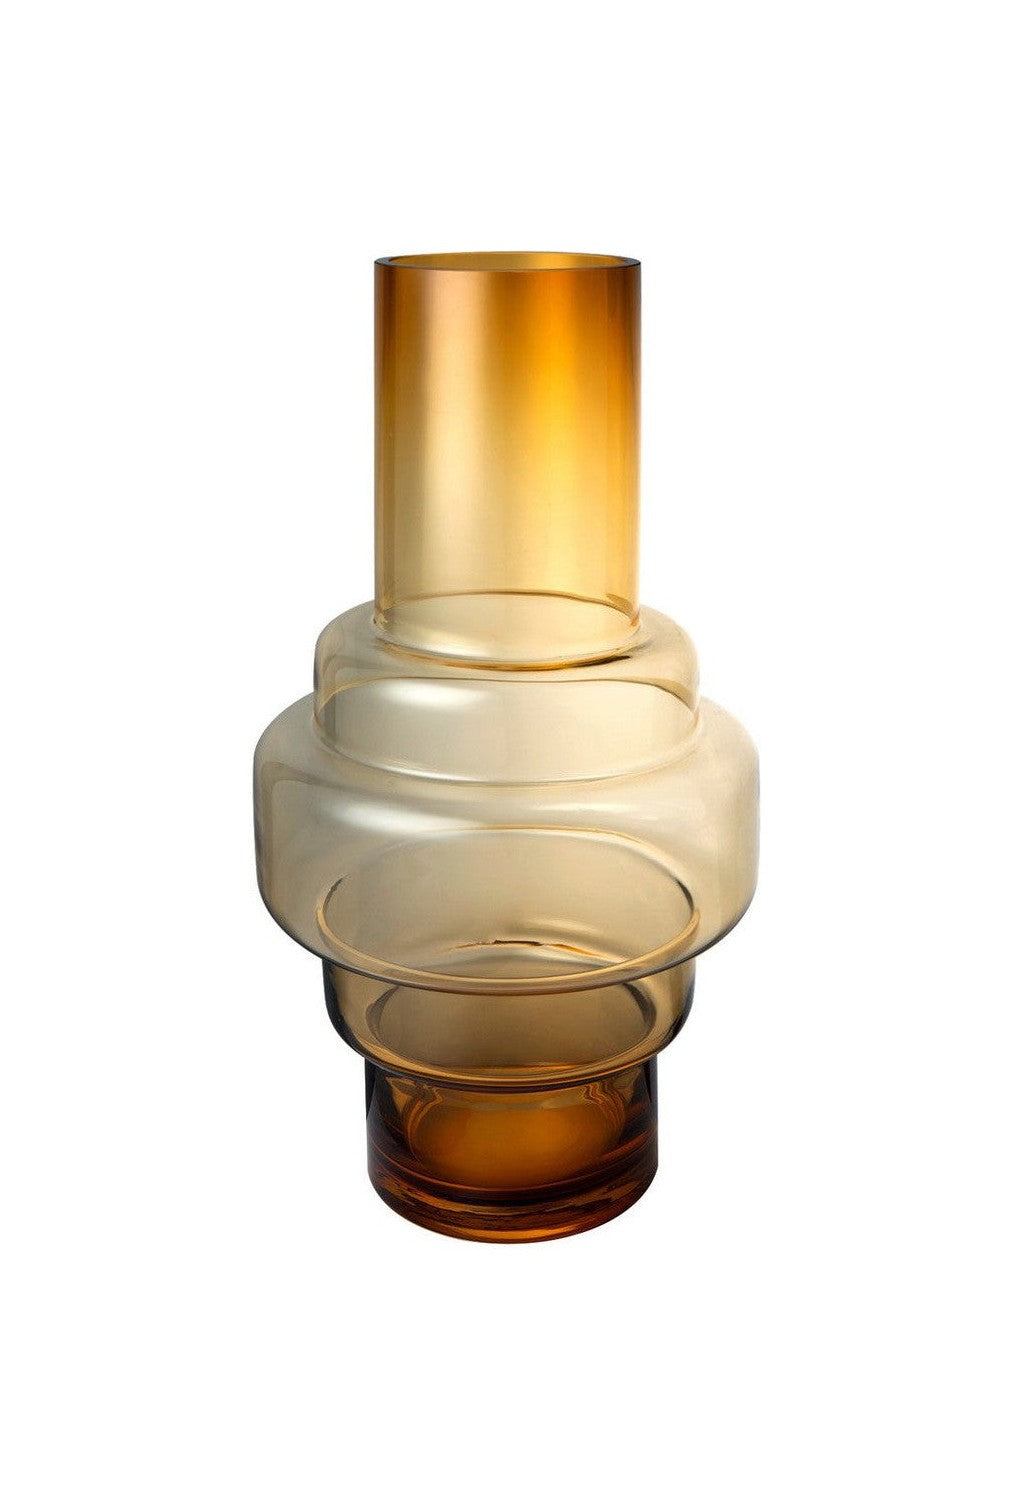 retro style thick glass vase XXL,series: TYLER 46AM, 9mm thick glass